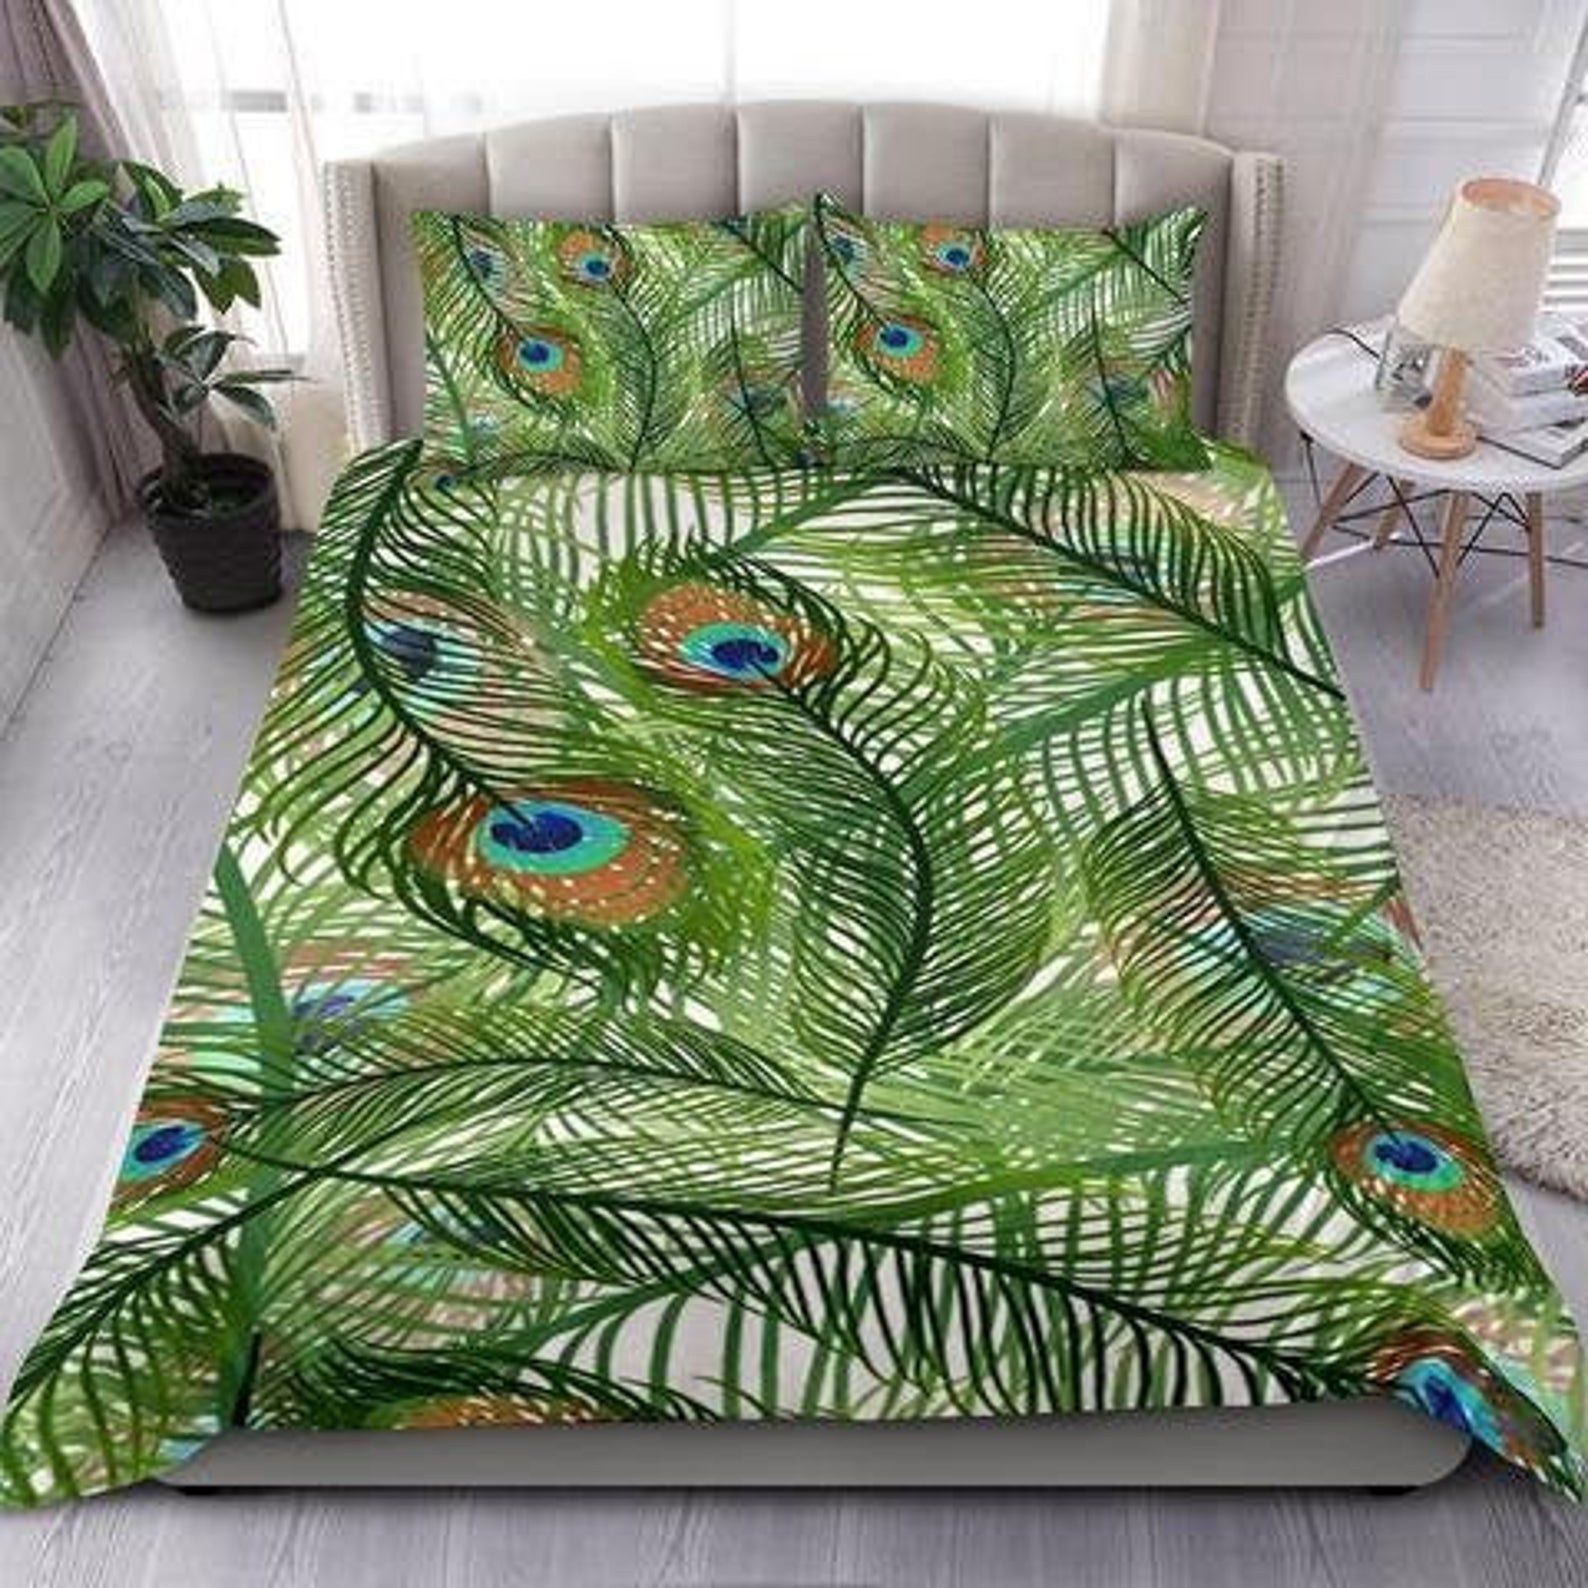 Green Peacock Feather Bedding Set Bed Sheets Spread Comforter Duvet Cover Bedding Sets